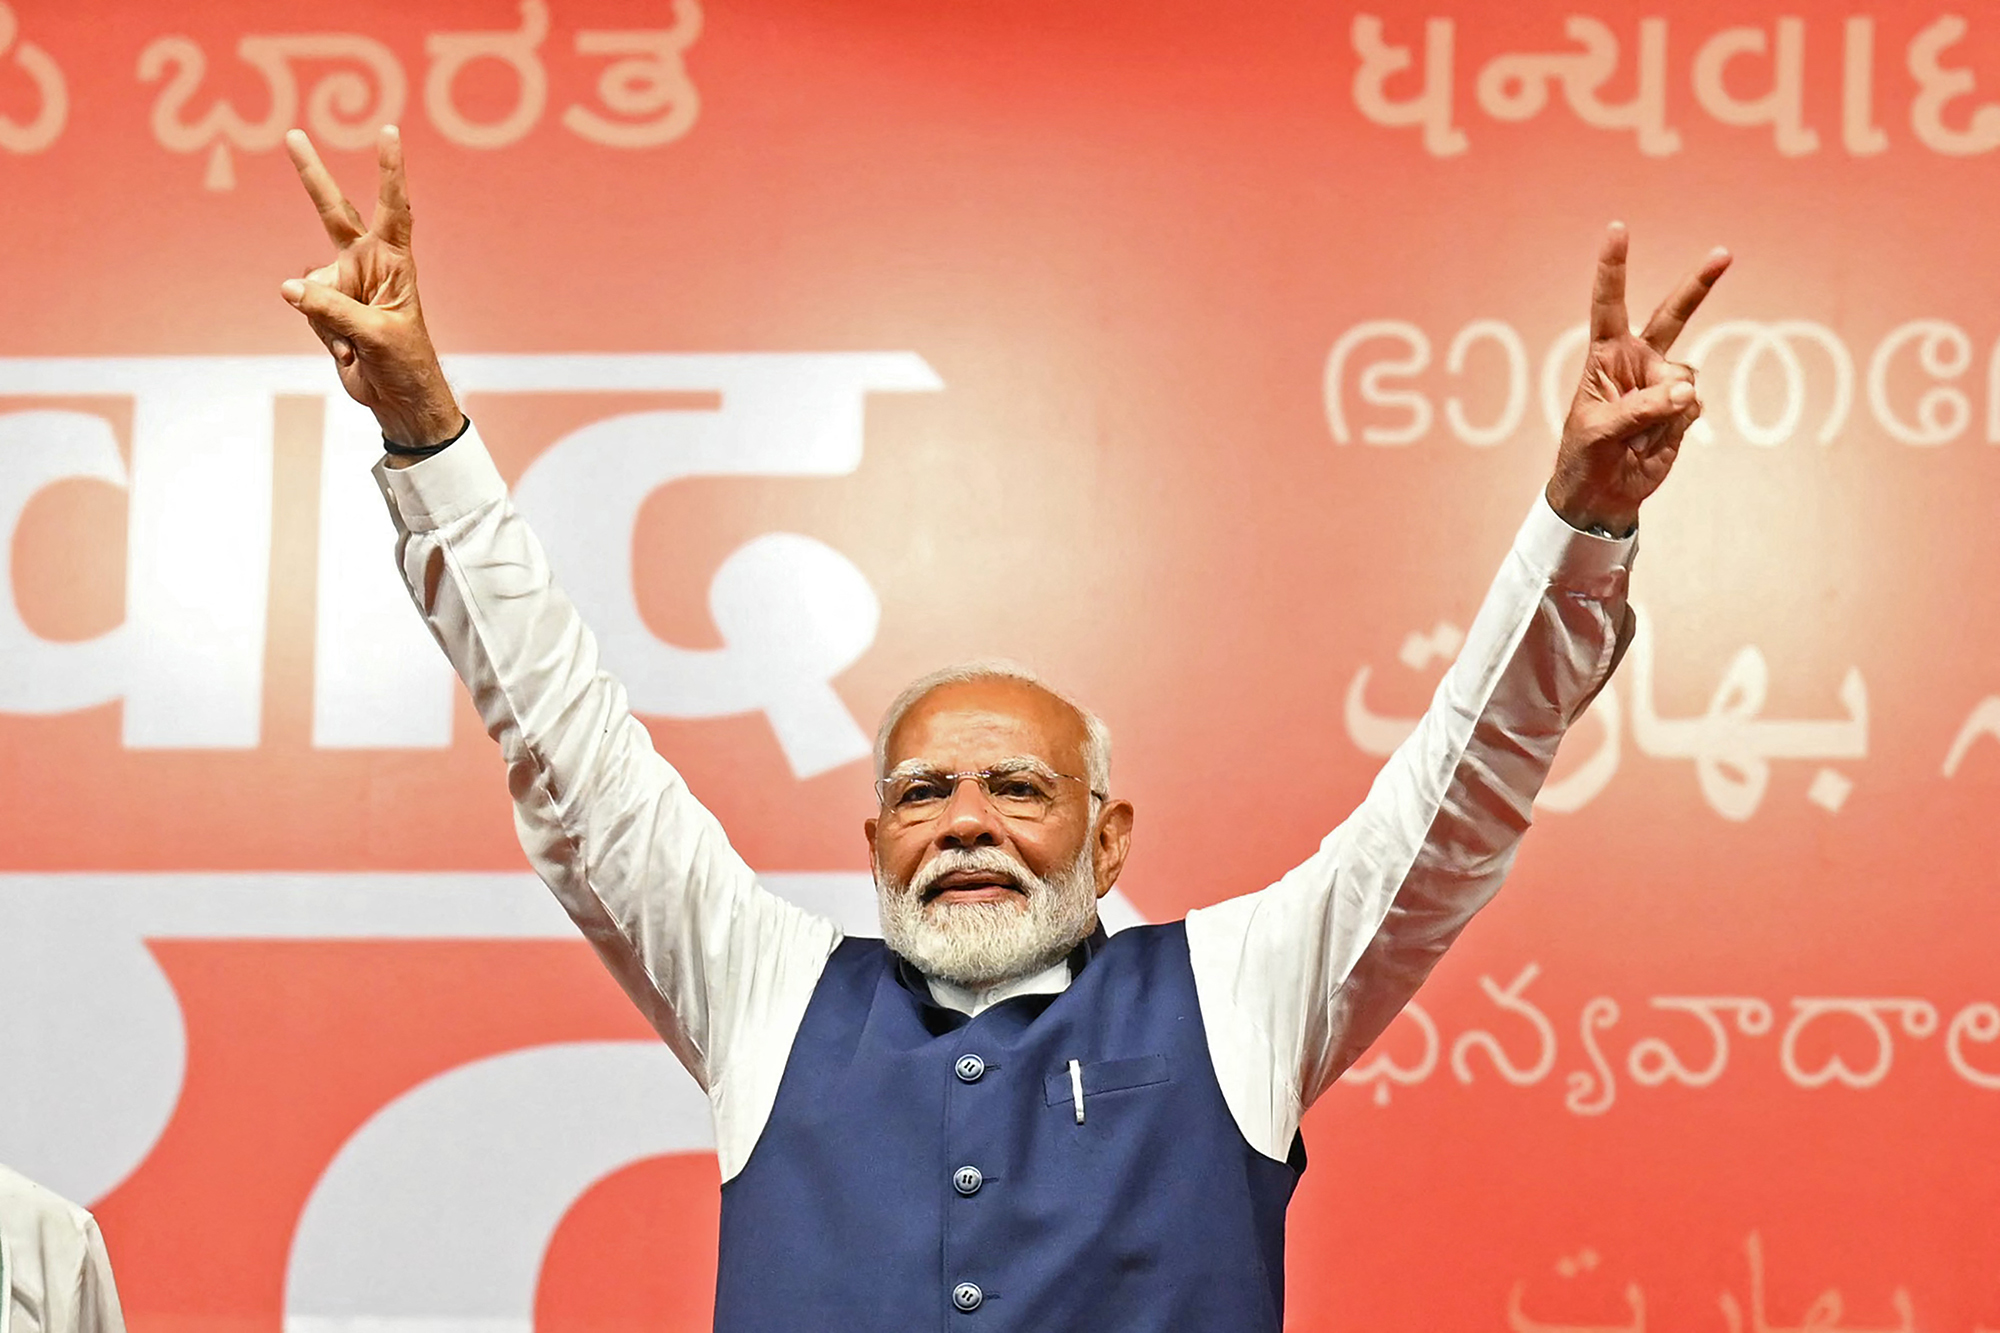 India's Prime Minister Narendra Modi flashes victory sign at the Bharatiya Janata Party (BJP) headquarters to celebrate the party's win in country's general election, in New Delhi, India, on June 4.